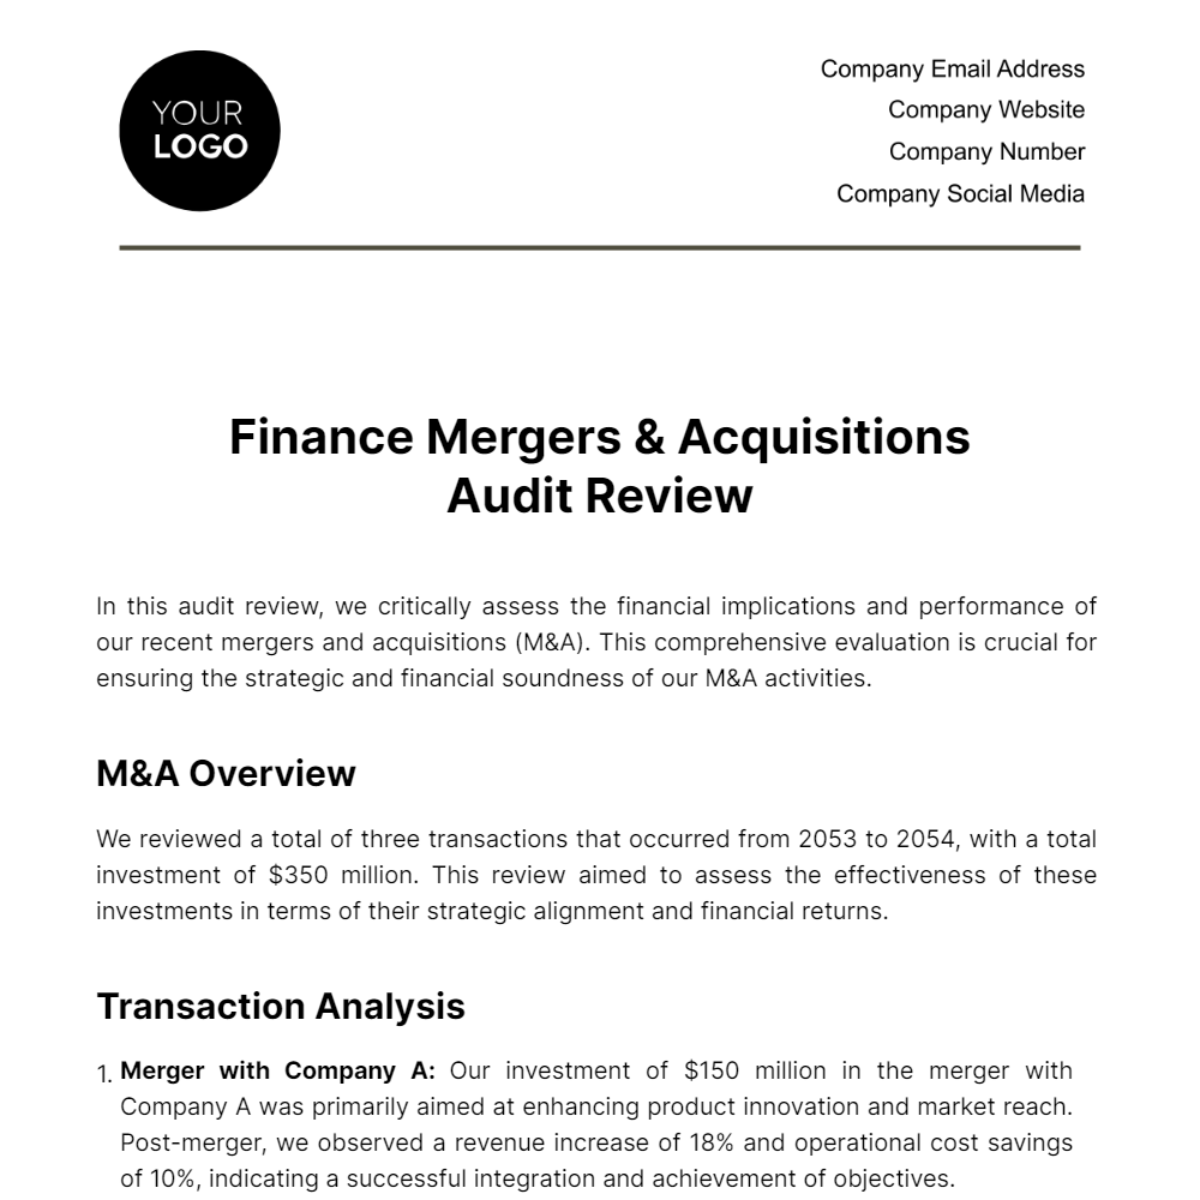 Free Finance Mergers & Acquisitions Audit Review Template